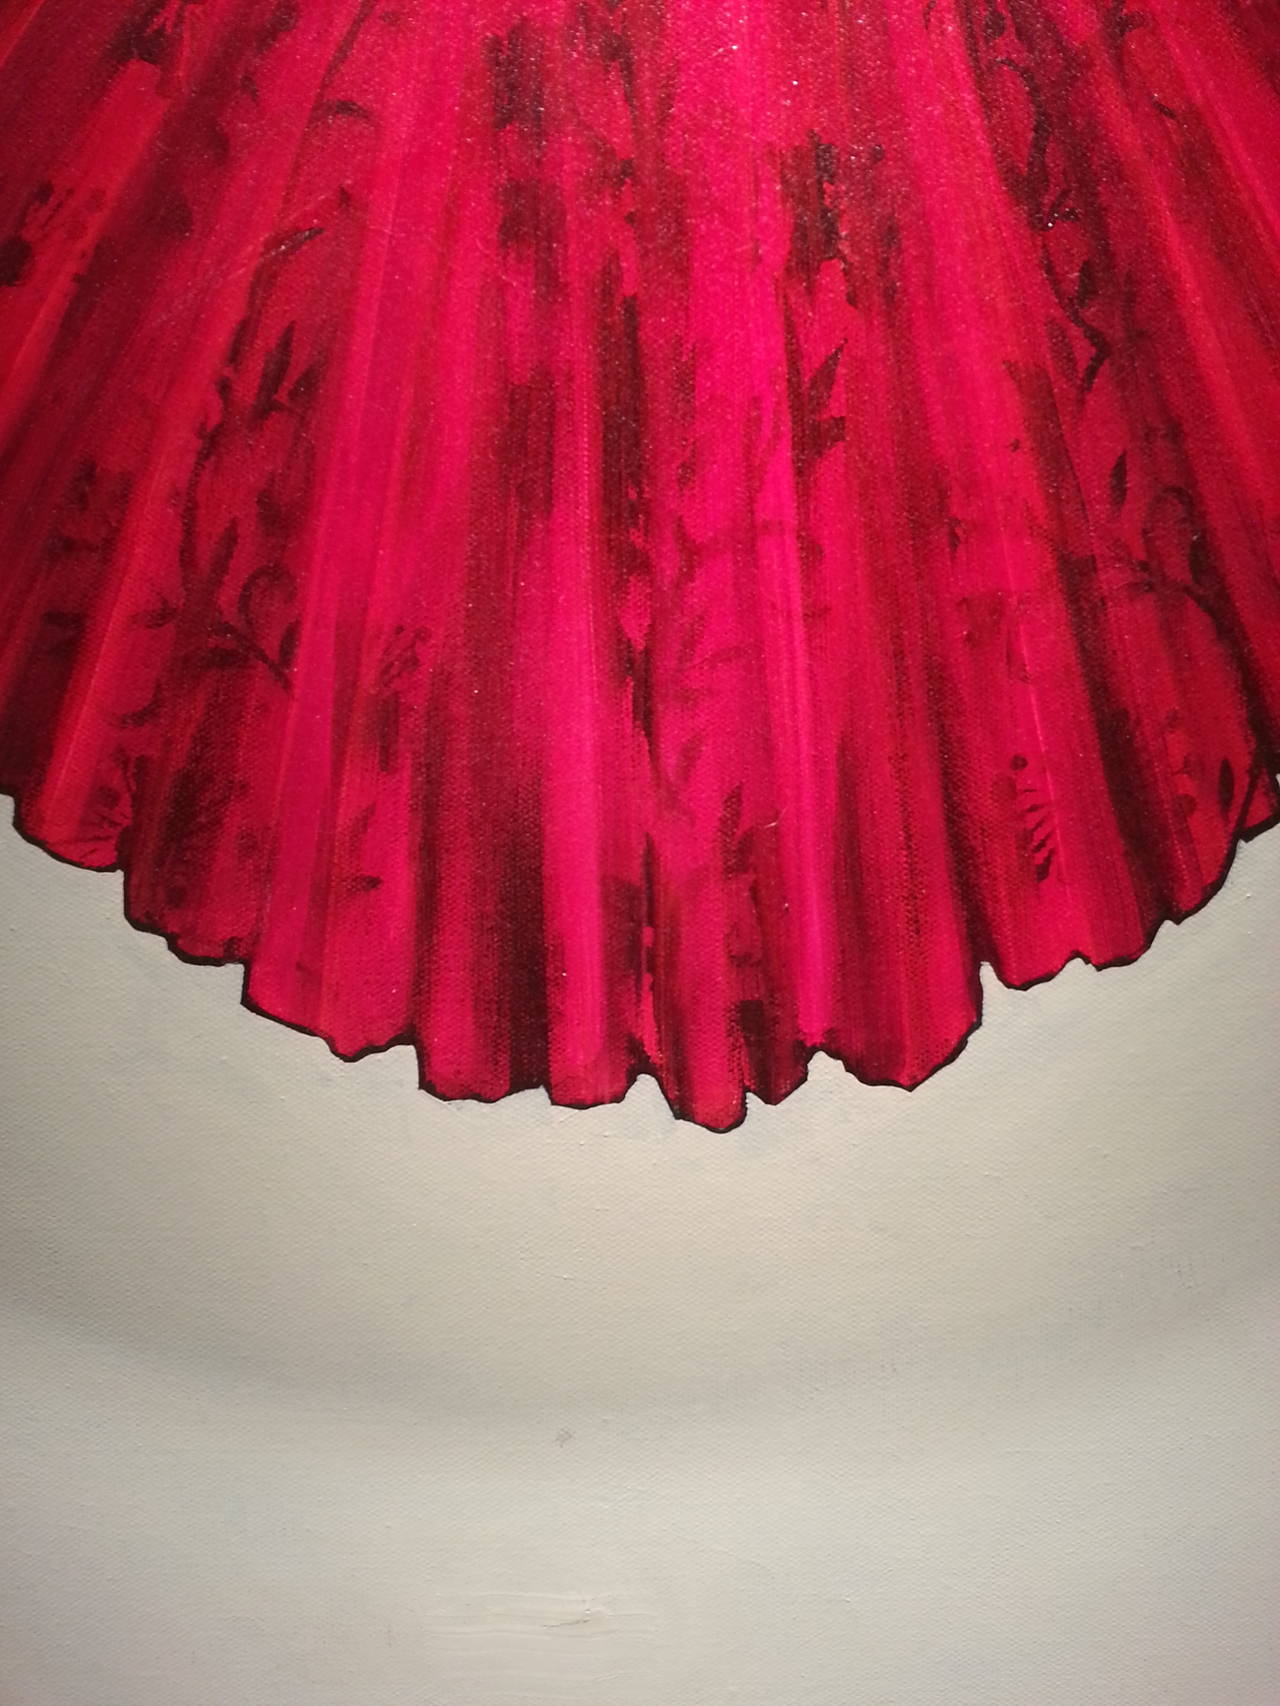 Red Dress - Painting by Marketa Sivek